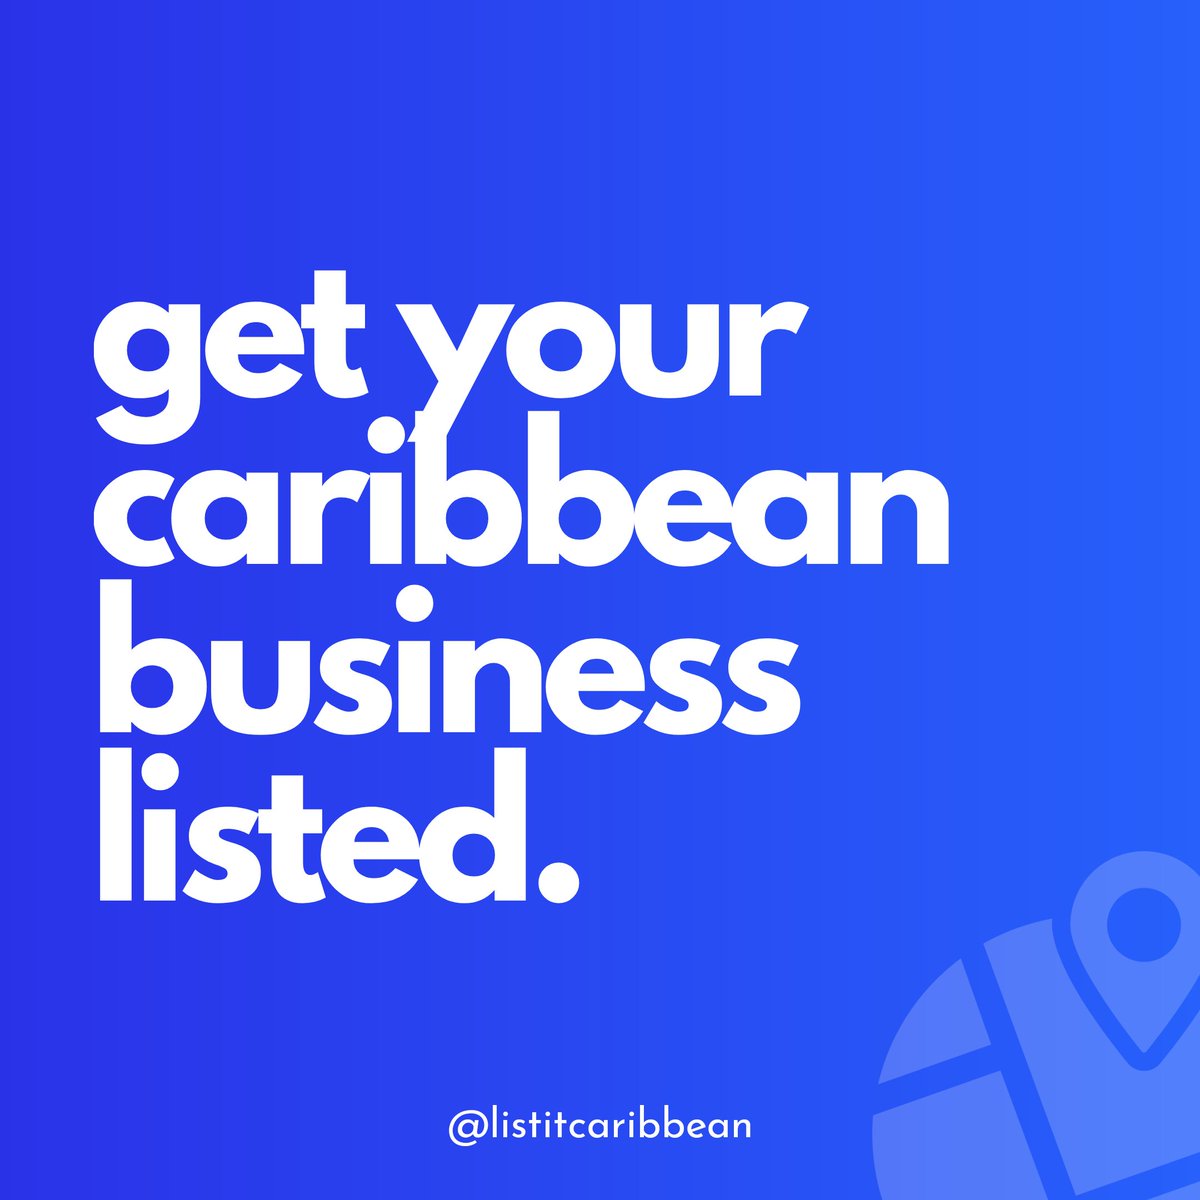 List It Caribbean is an online listing directory for Caribbean businesses, events, jobs, real estate and vehicles. Our mission is to provide an online platform for Caribbean people to market their services and discover other listings in the Caribbean. 
FB/IG: @listitcaribbean